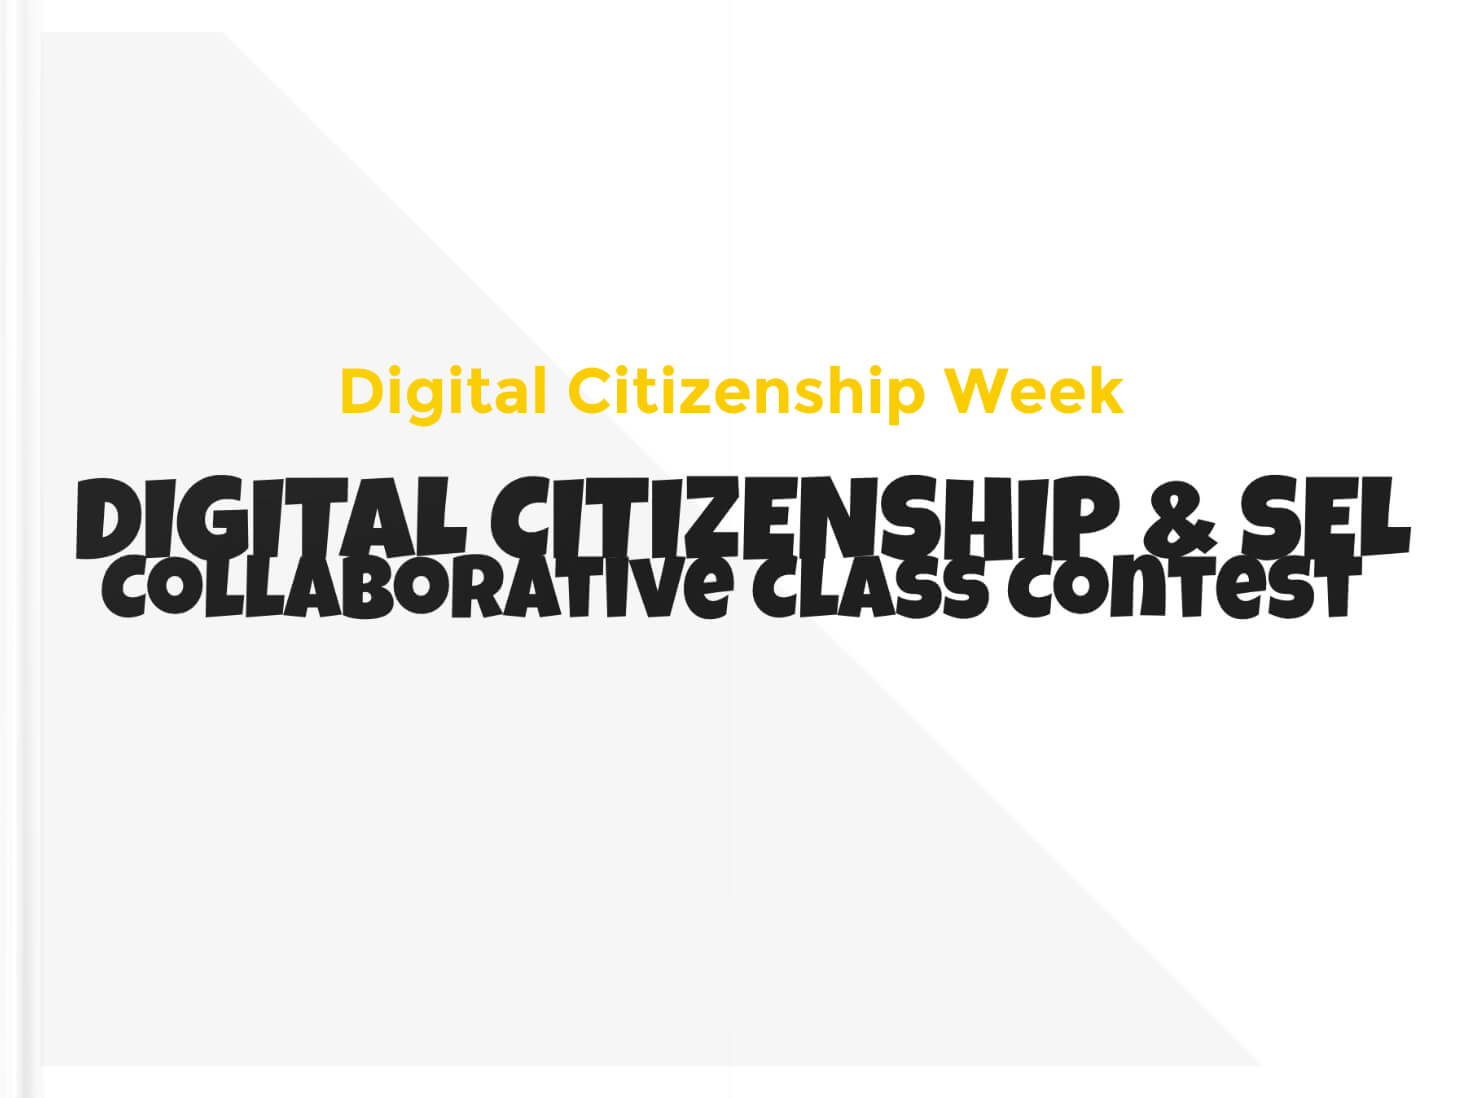 Digital Citizenship and SEL collaborative class contest (Implementation book)